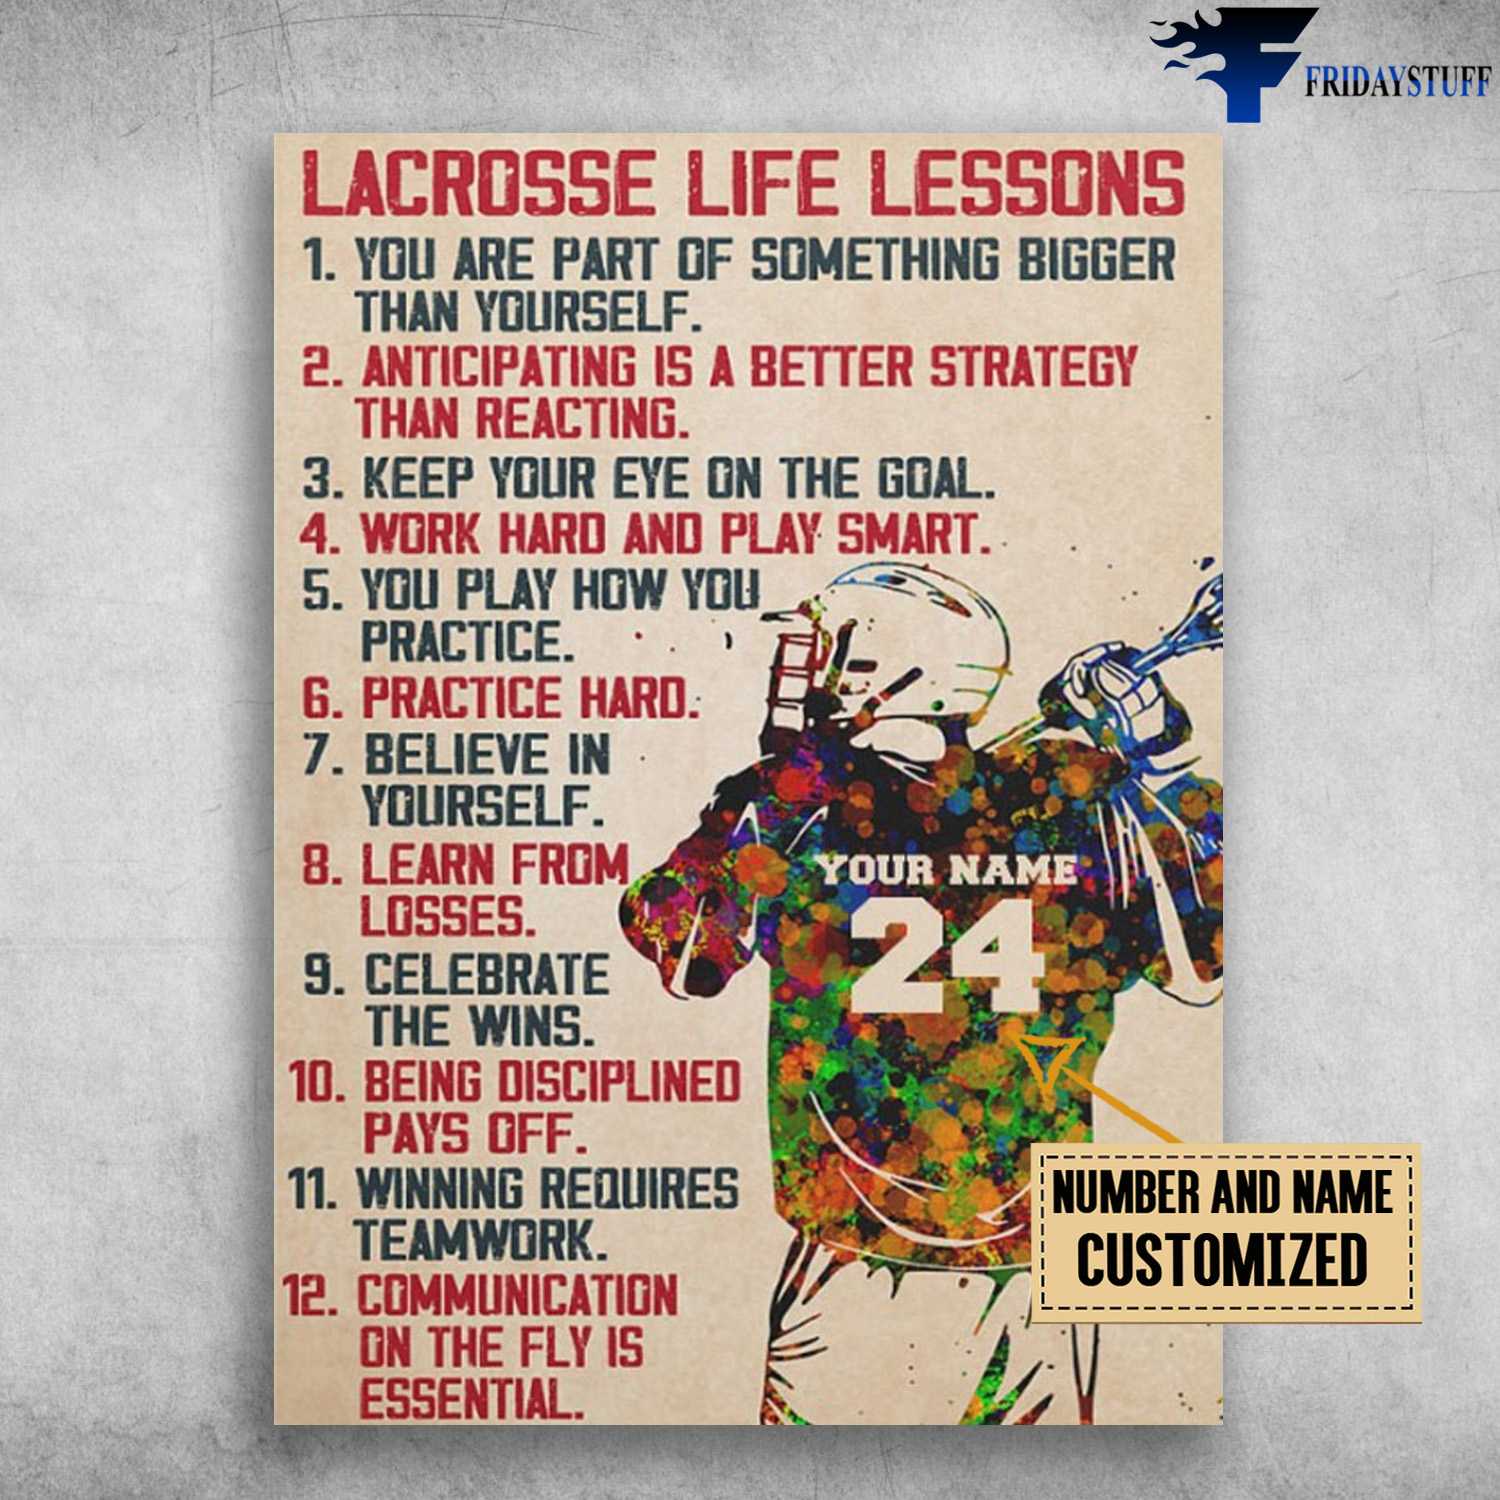 Lacrosse Life Lessons, Football Poster, You Are Part Of Something Bigger Than Yourself, You Play How You Practice, Practice Hard, Every Inch Of Progress Gets You Closer To The Goal